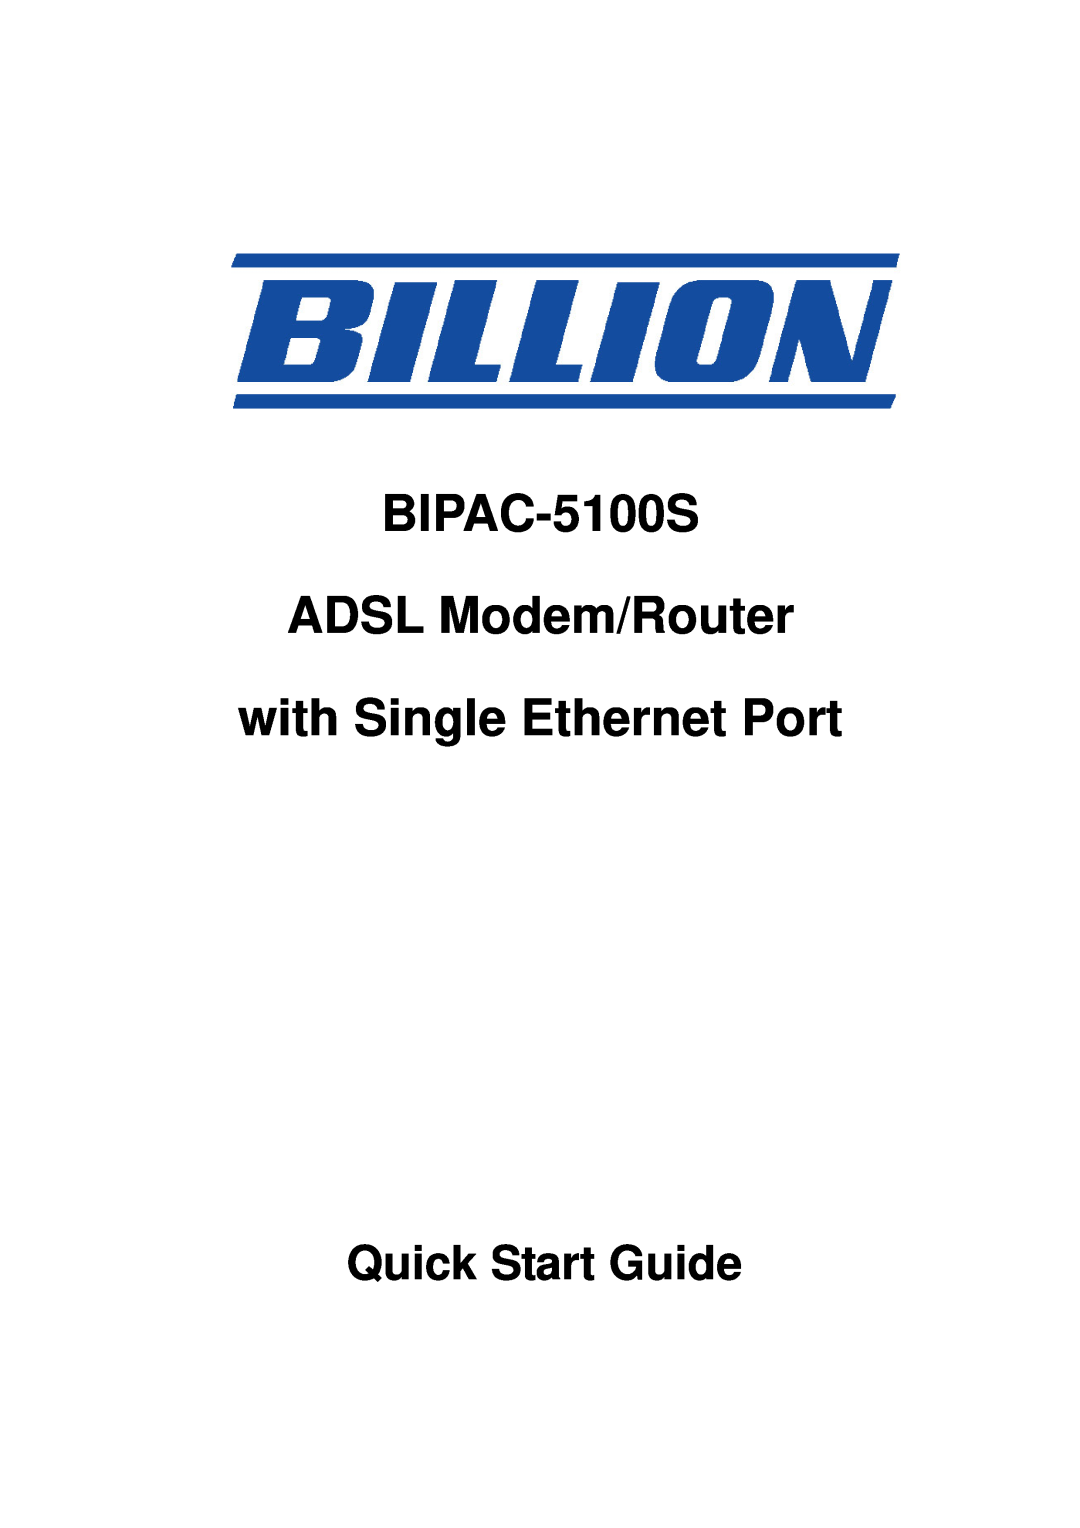 Billion Electric Company quick start BIPAC-5100S ADSL Modem/Router with Single Ethernet Port, Quick Start Guide 